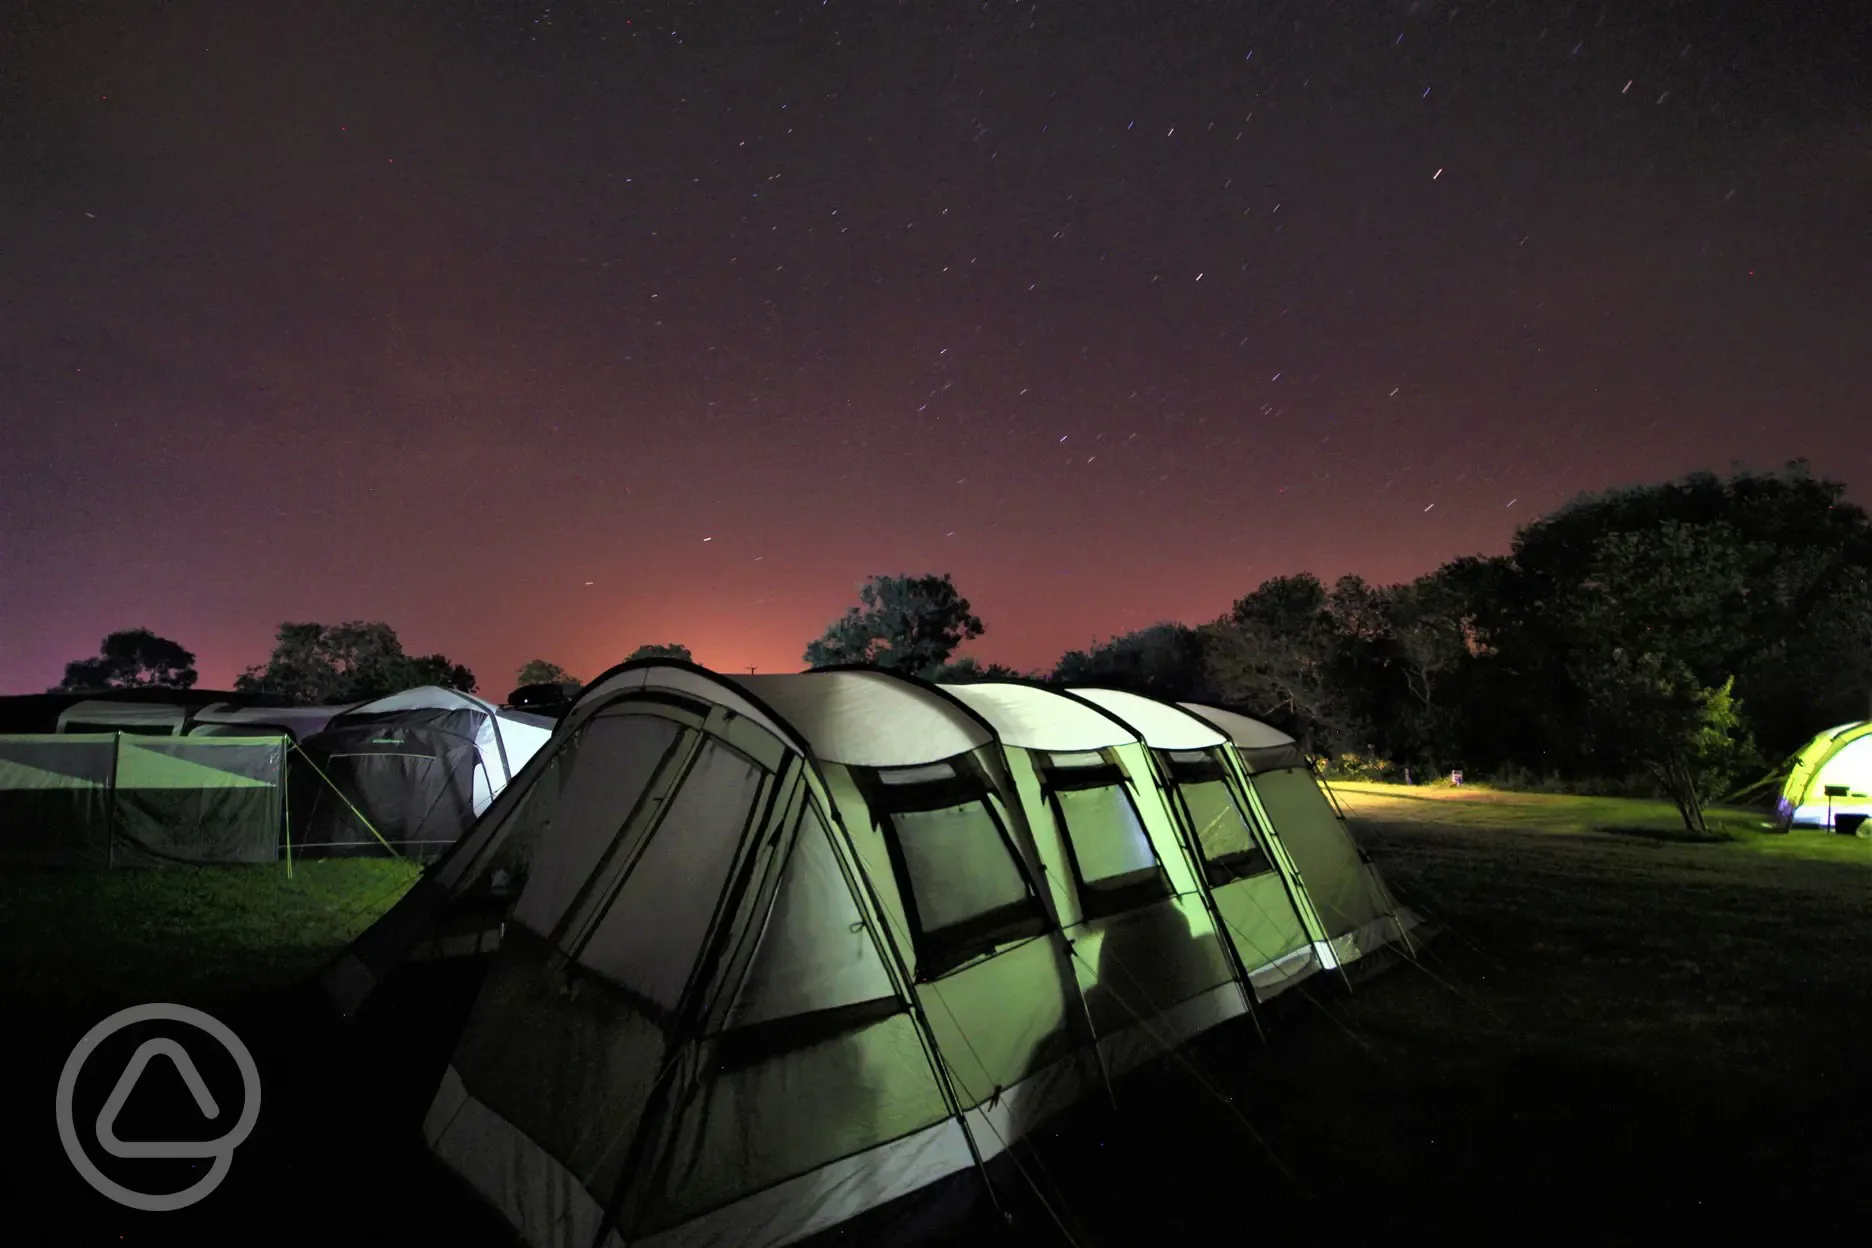 Electric grass pitches at night